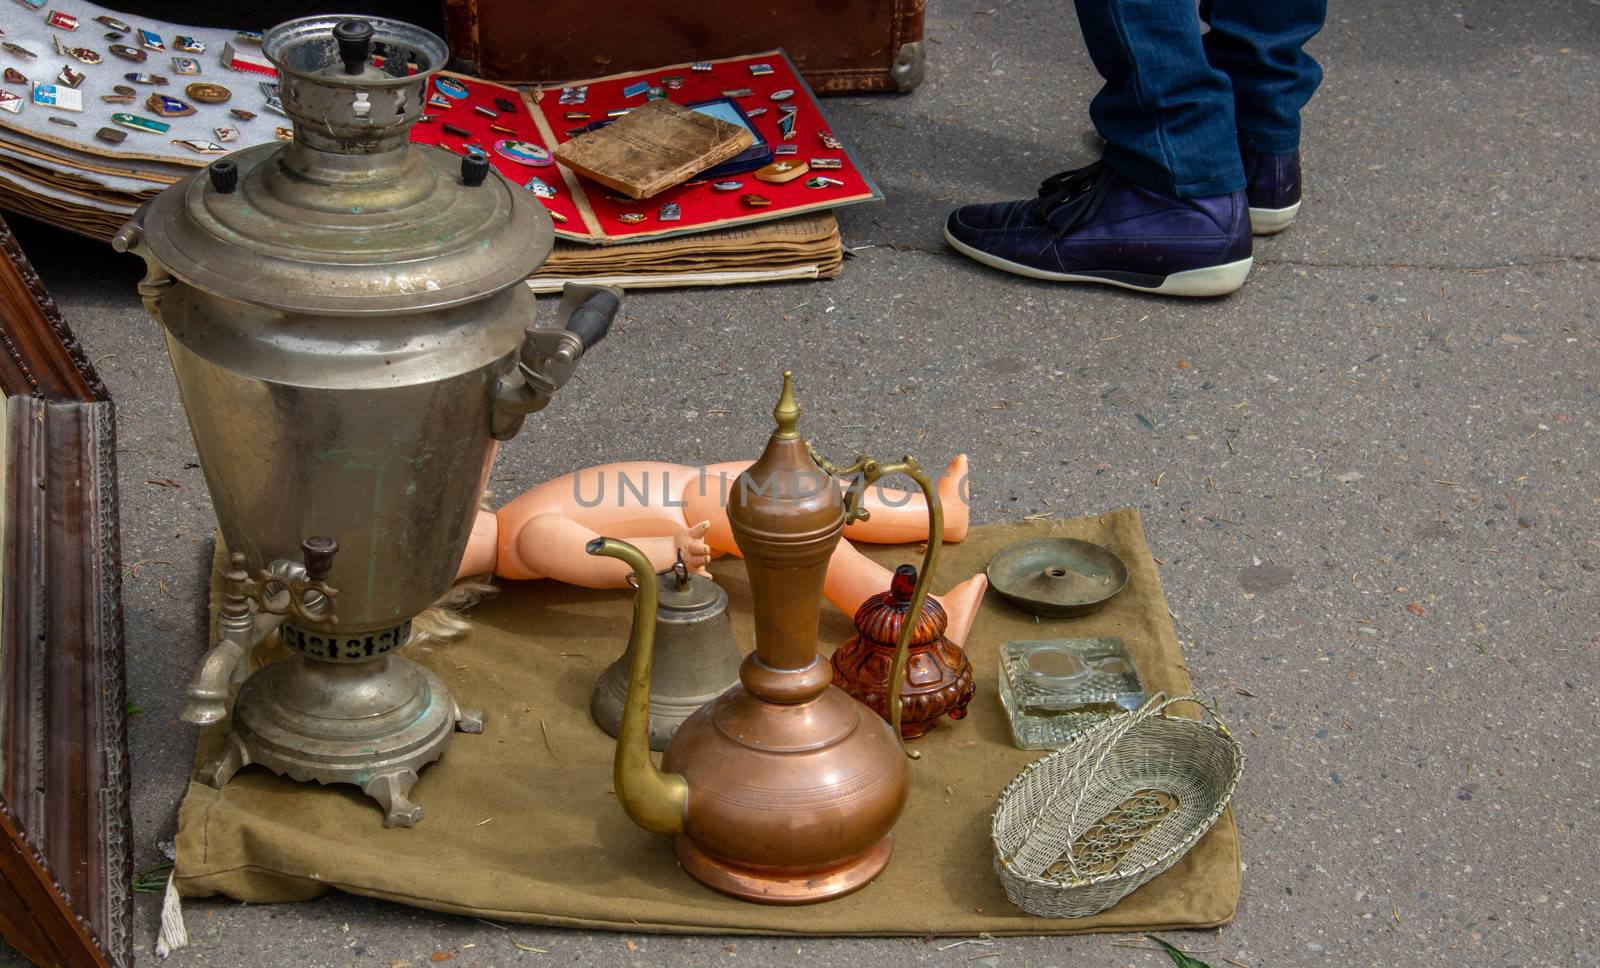 A group of various antique items on the asphalt at a flea market